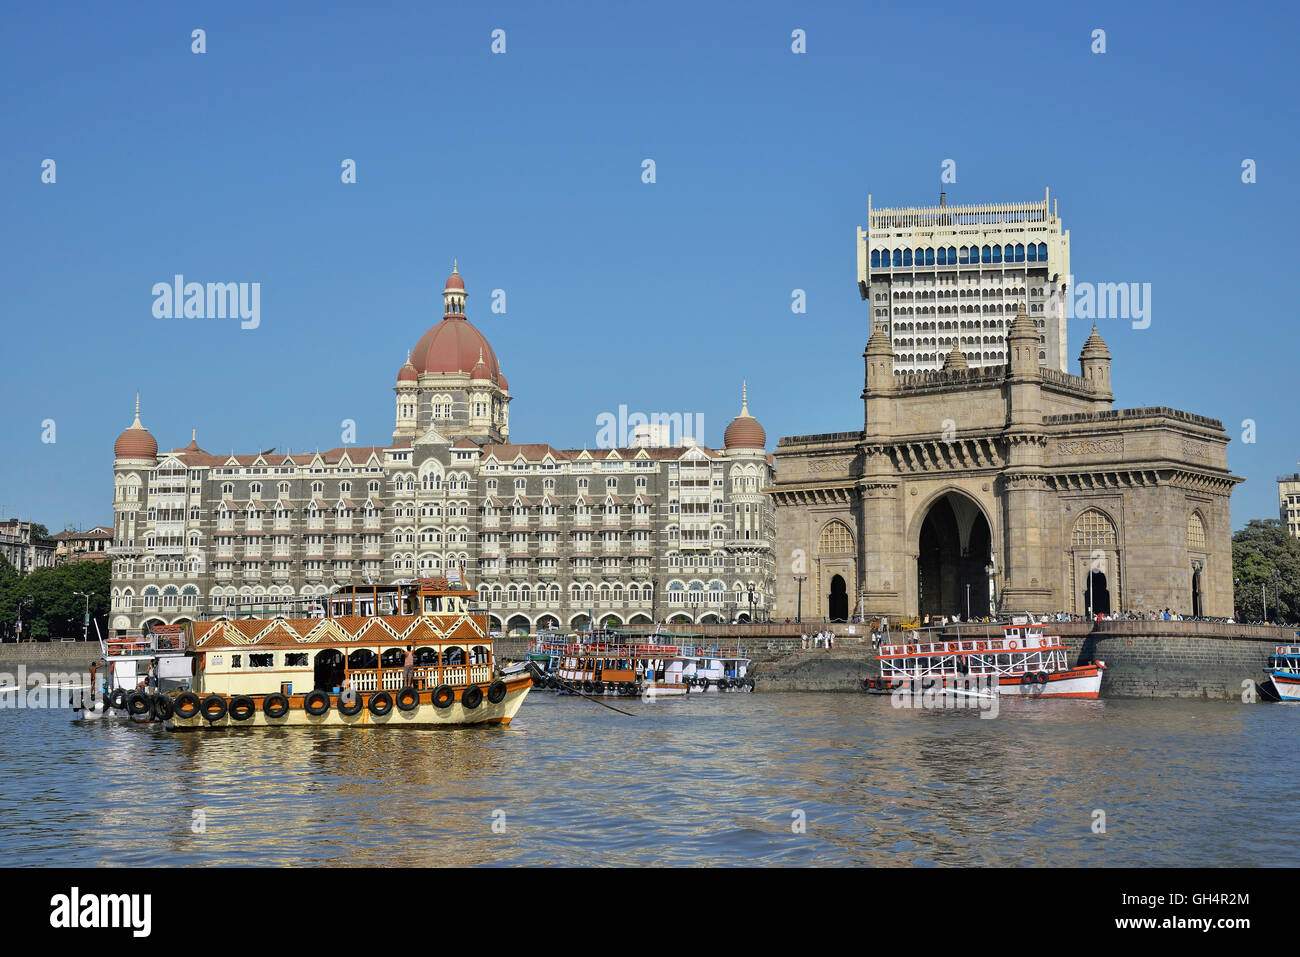 geography / travel, India, Taj Mahal Hotel and gateway of India, landmark of Mumbai, built to the remembrance at the visitation of king George V. and of his woman Mary 1911, Mumbai, Maharashtra, Asia, Additional-Rights-Clearance-Info-Not-Available Stock Photo